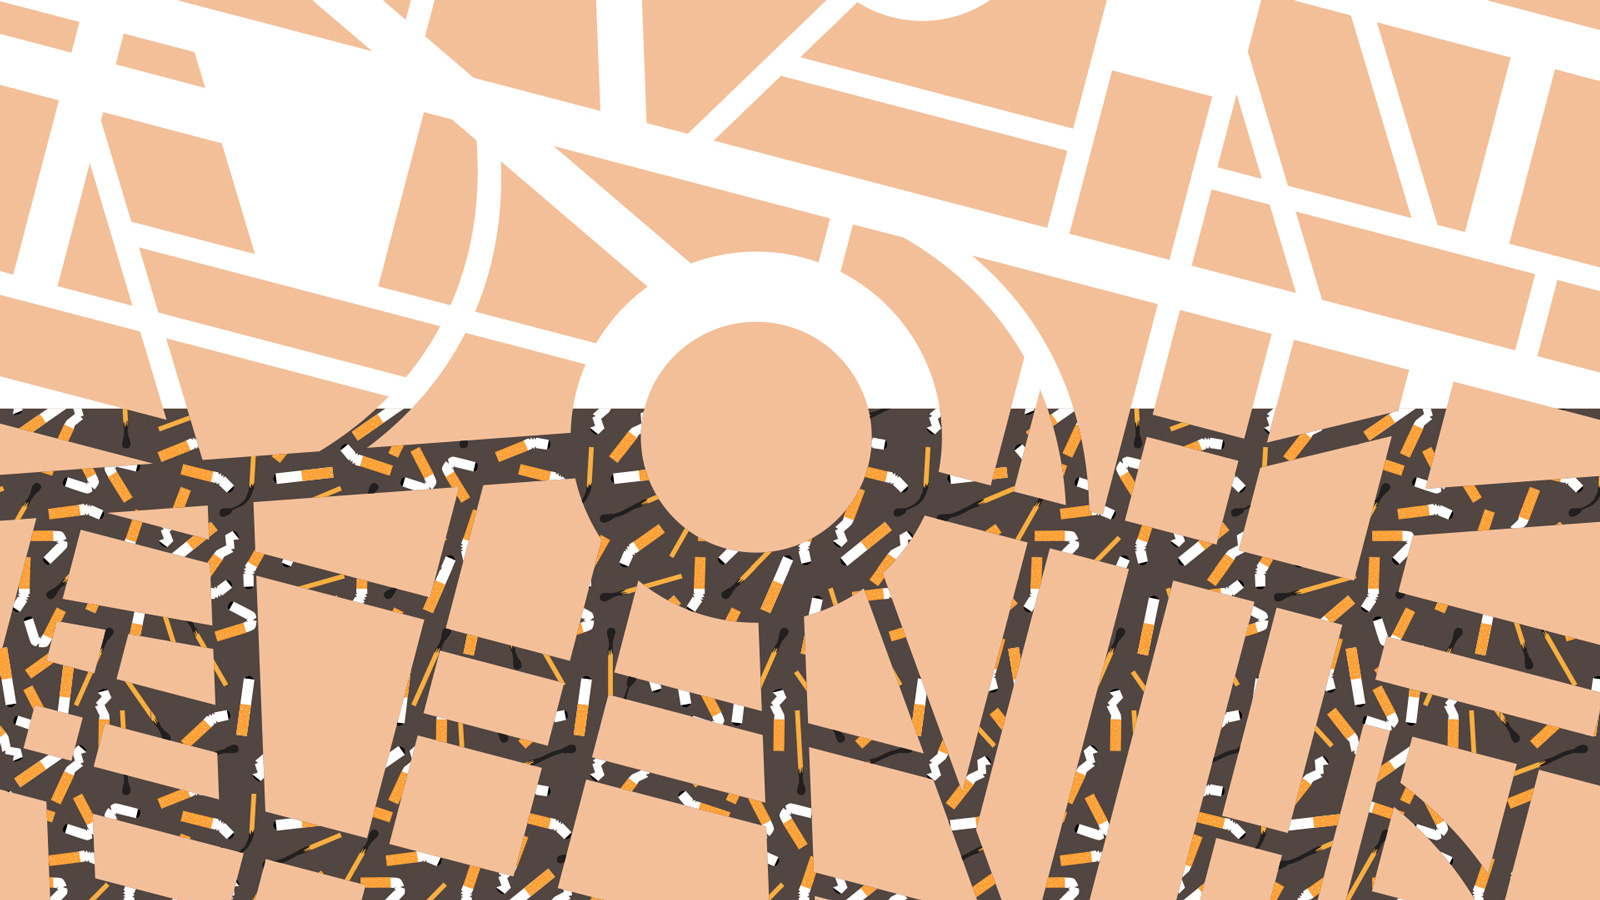 Illustration of a map, showing streets being filled with cigarette litter